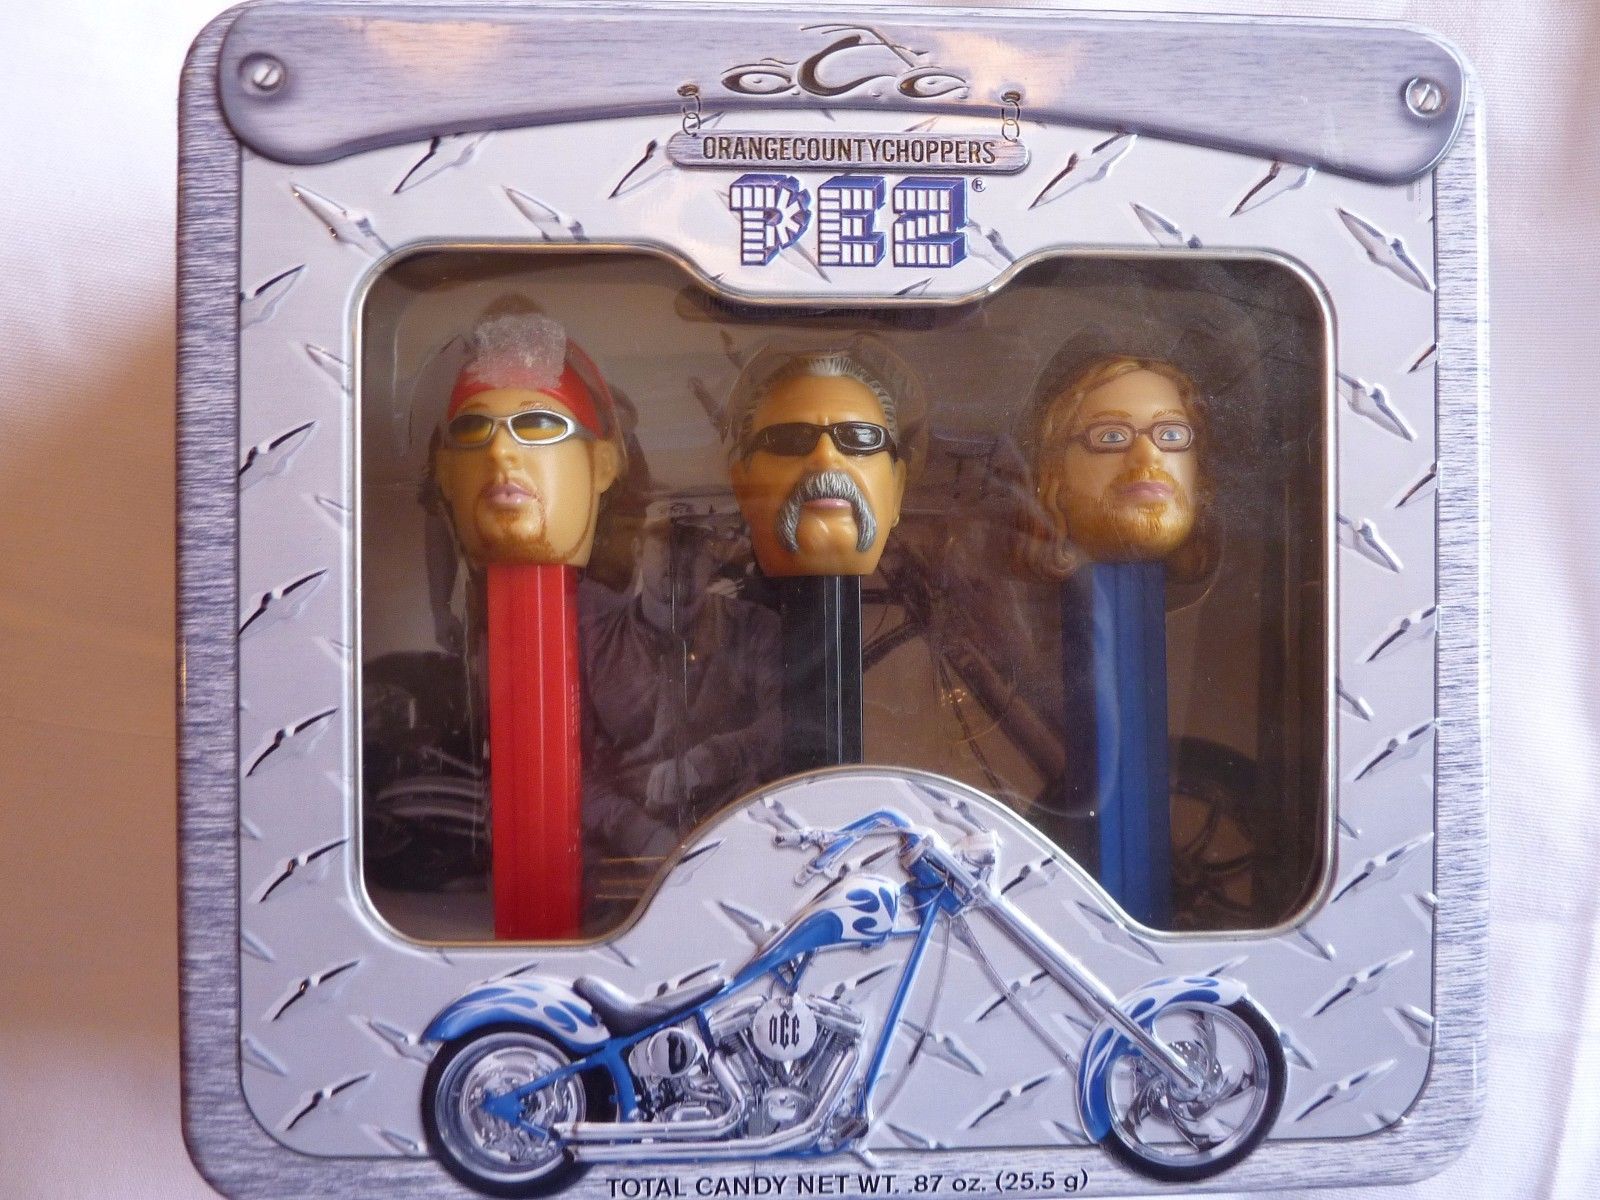 Limited Edition 2006 Orange County Choppers PEZ Dispenser Set in Gift Tin - $16.61